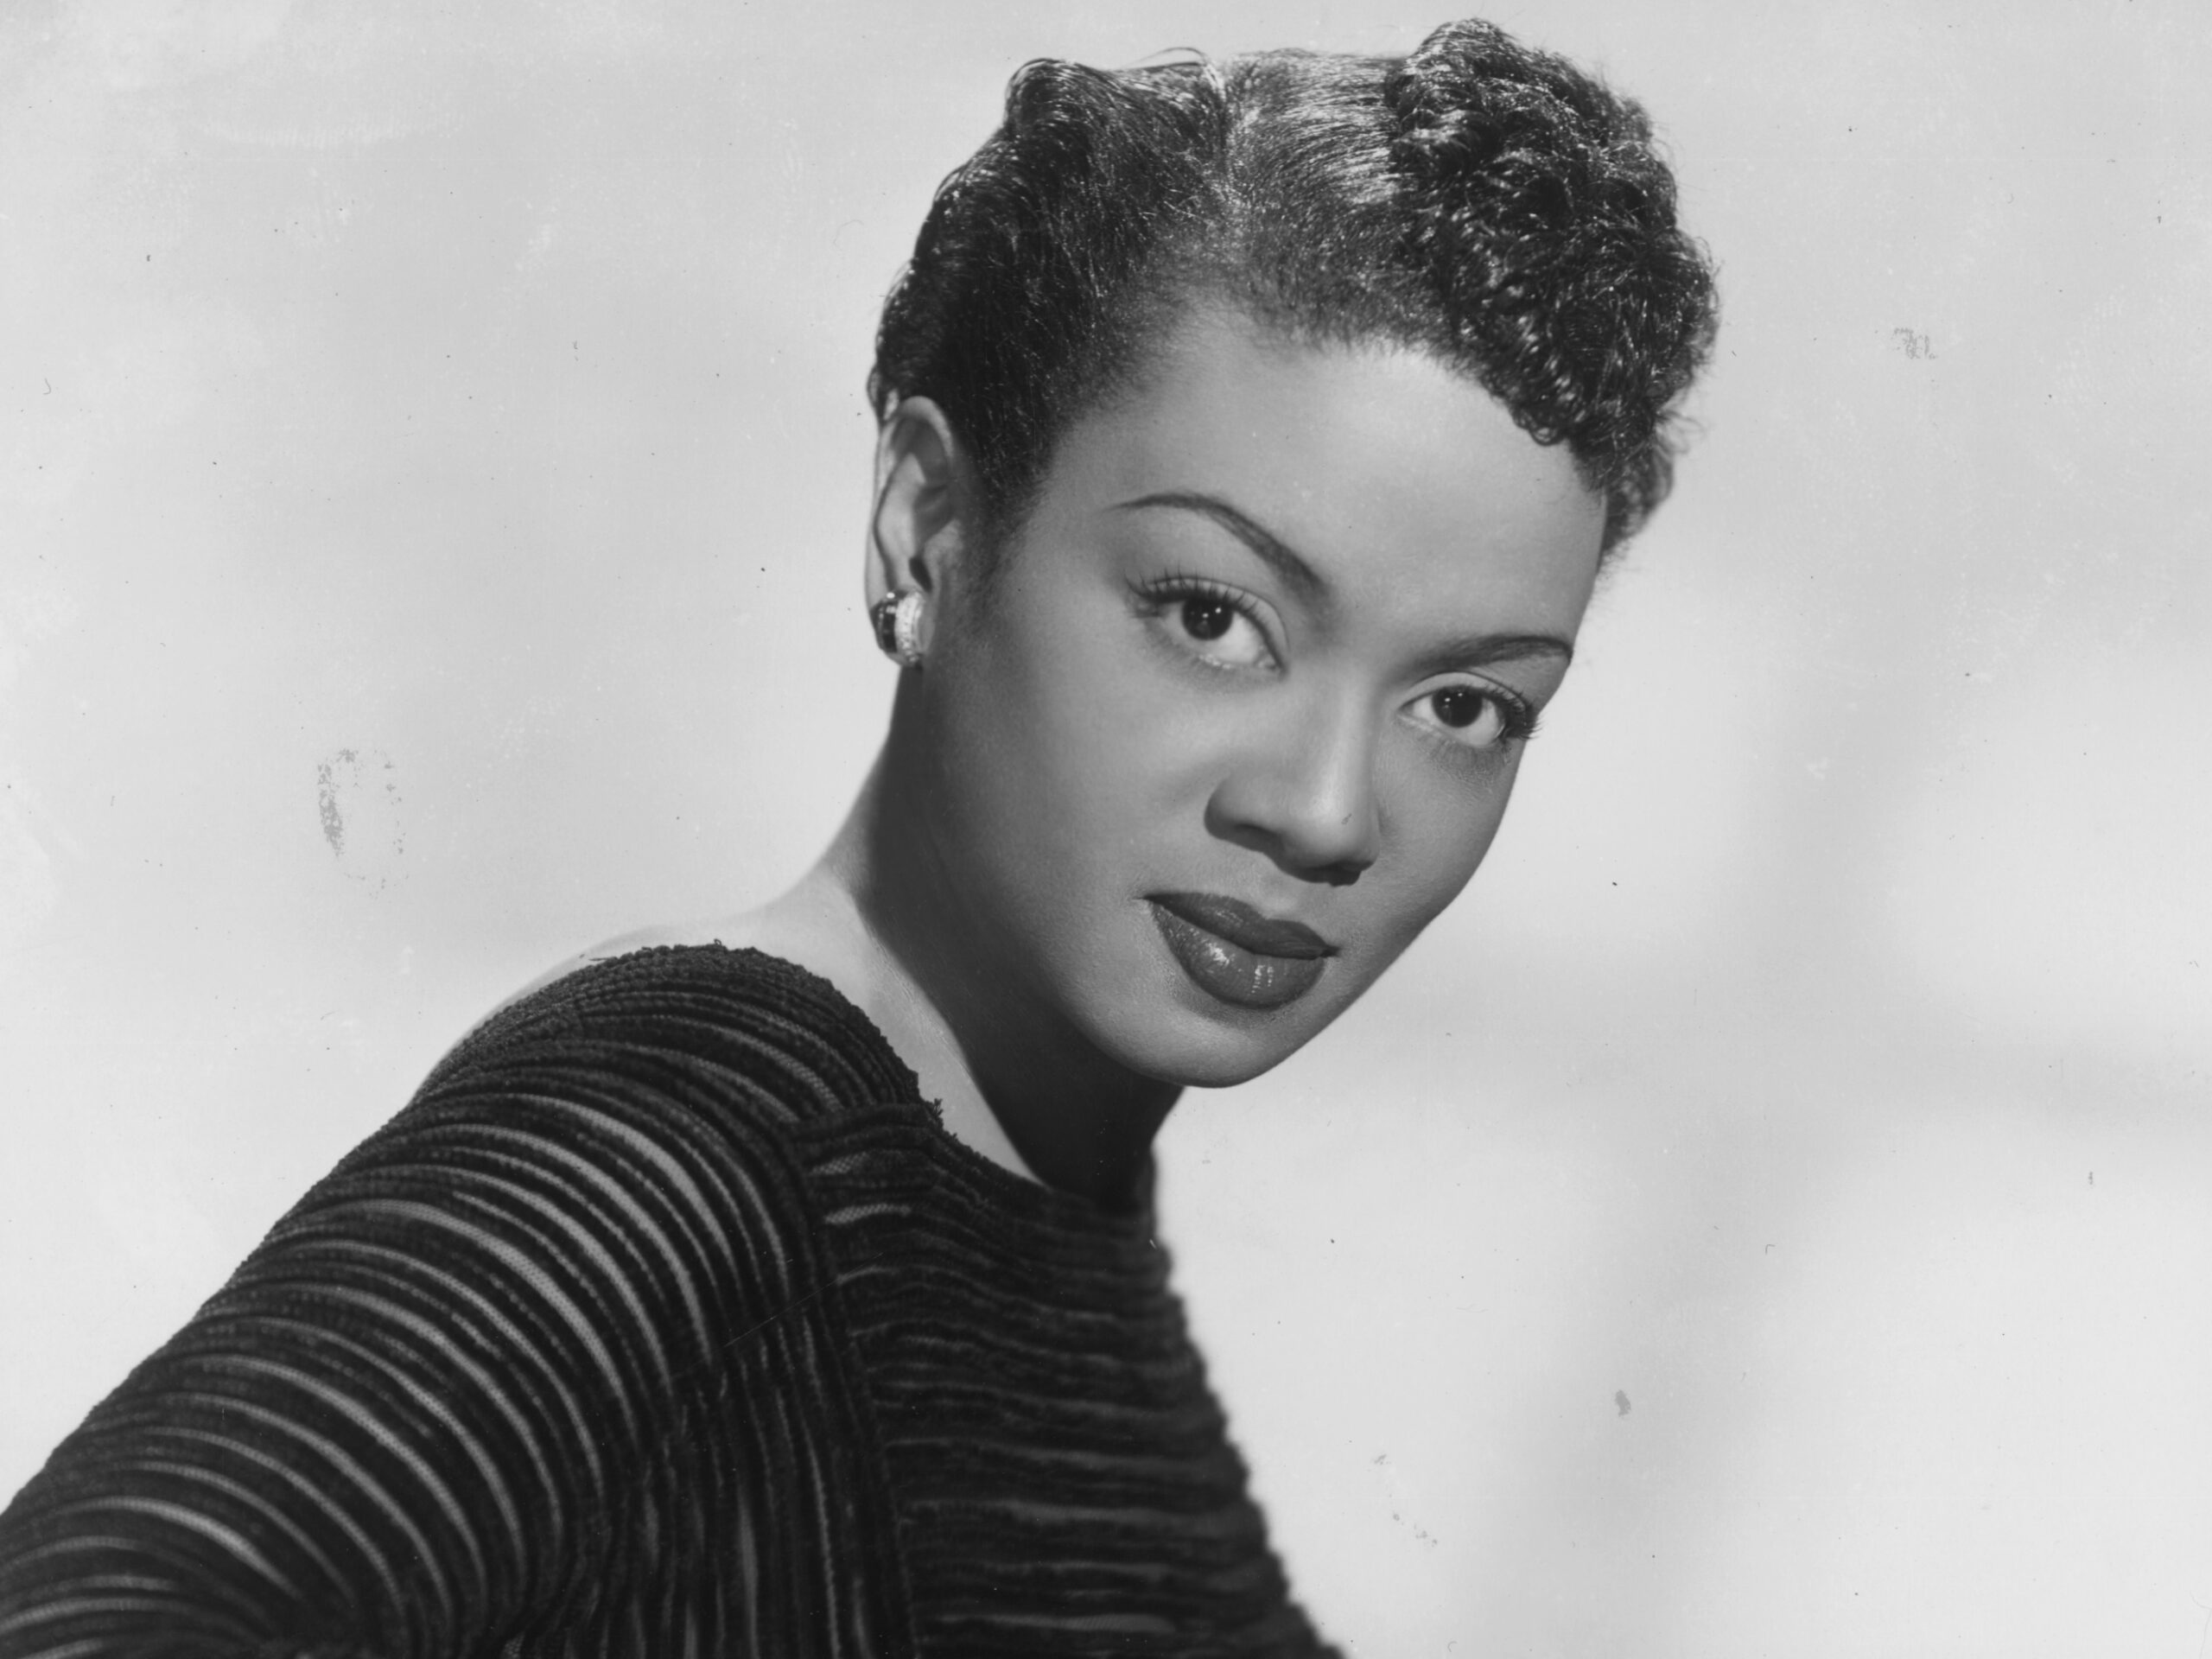 circa 1955: Studio portrait of Trinidadian-born jazz pianist and vocalist Hazel Scott, wearing a black dress with thin sheer panels, leaning against a white piano. Scott trained at the Julliard School. (Photo by Hulton Archive/Getty Images)